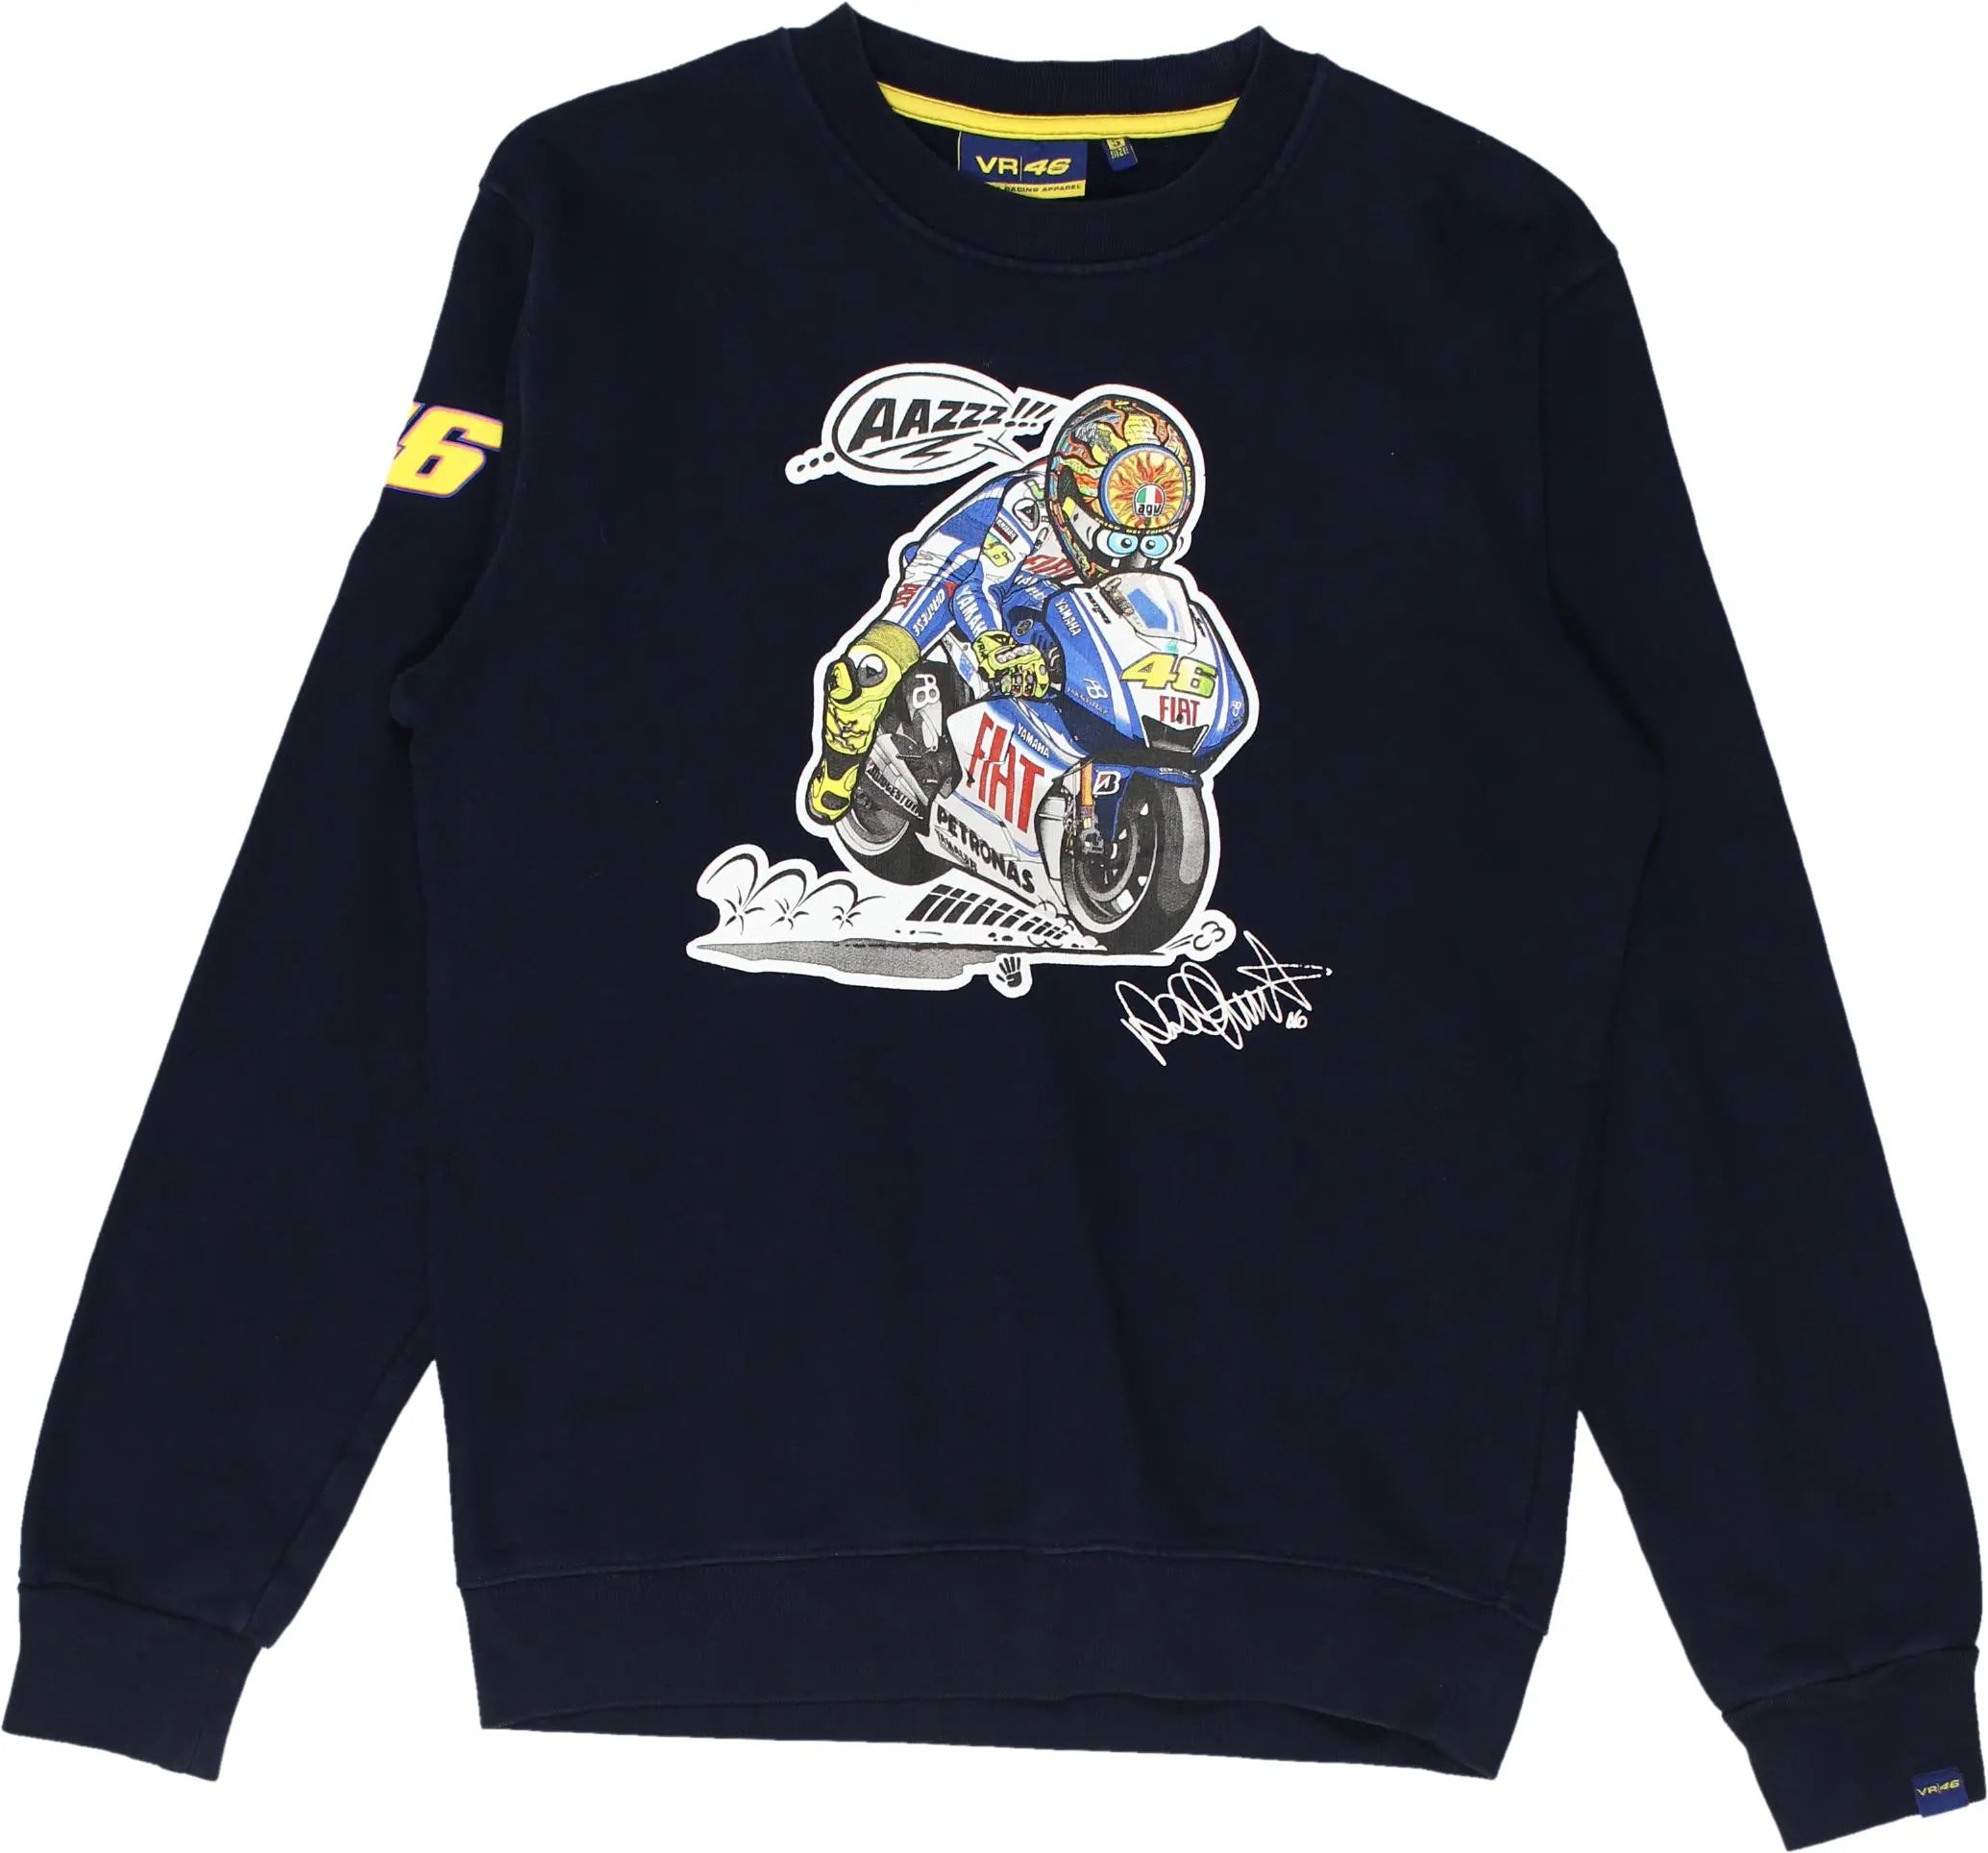 VR46 - Blue Sweater- ThriftTale.com - Vintage and second handclothing